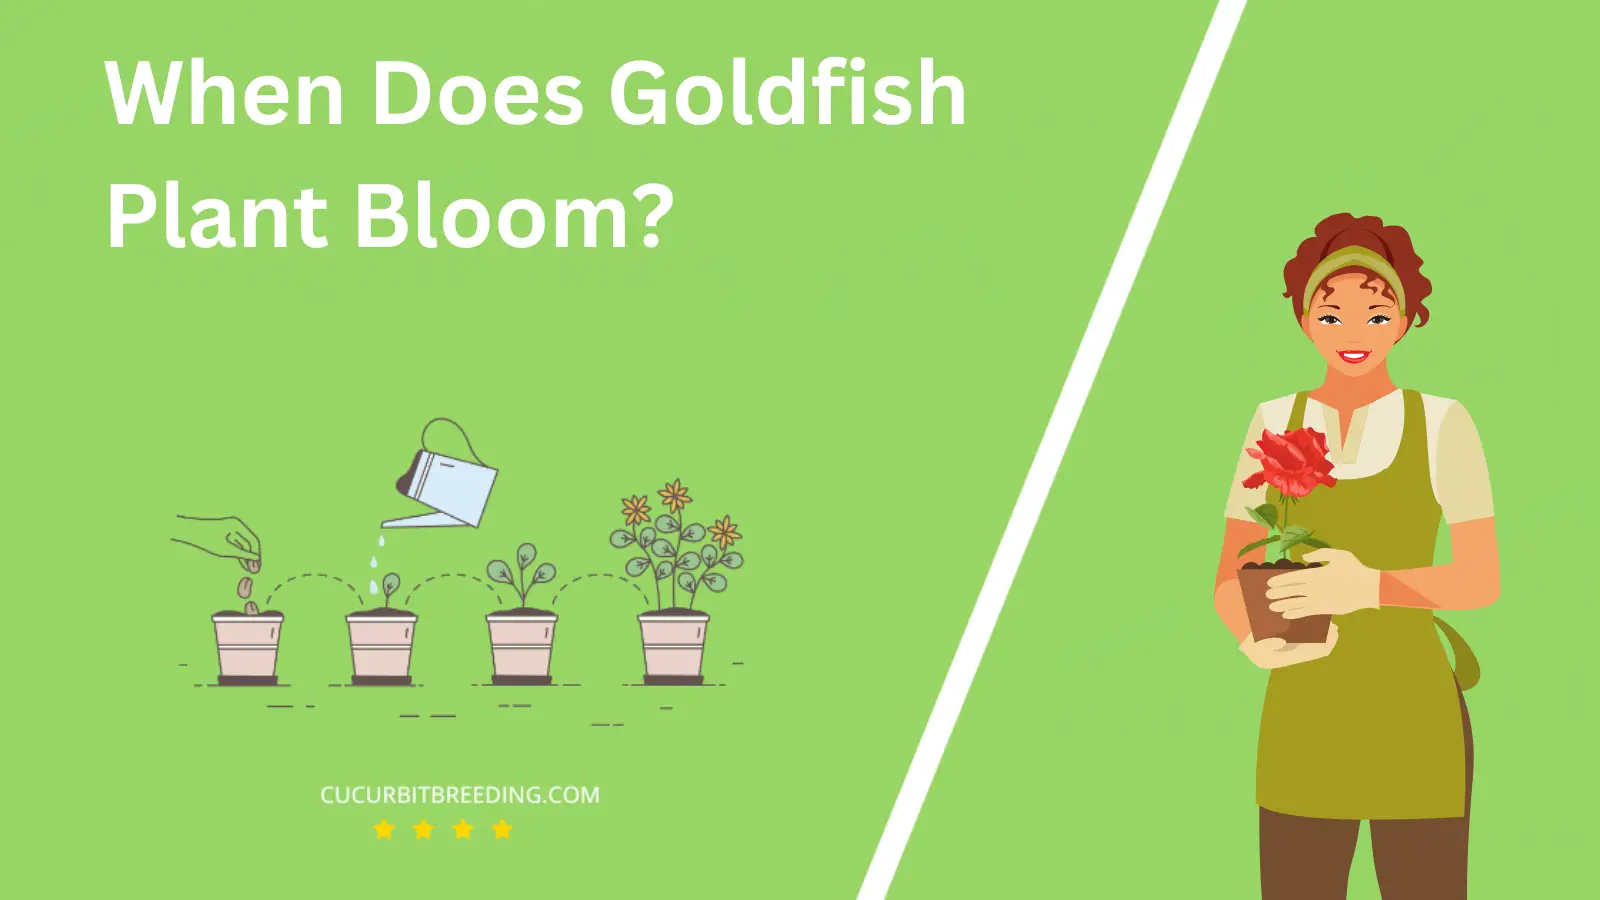 When Does Goldfish Plant Bloom?